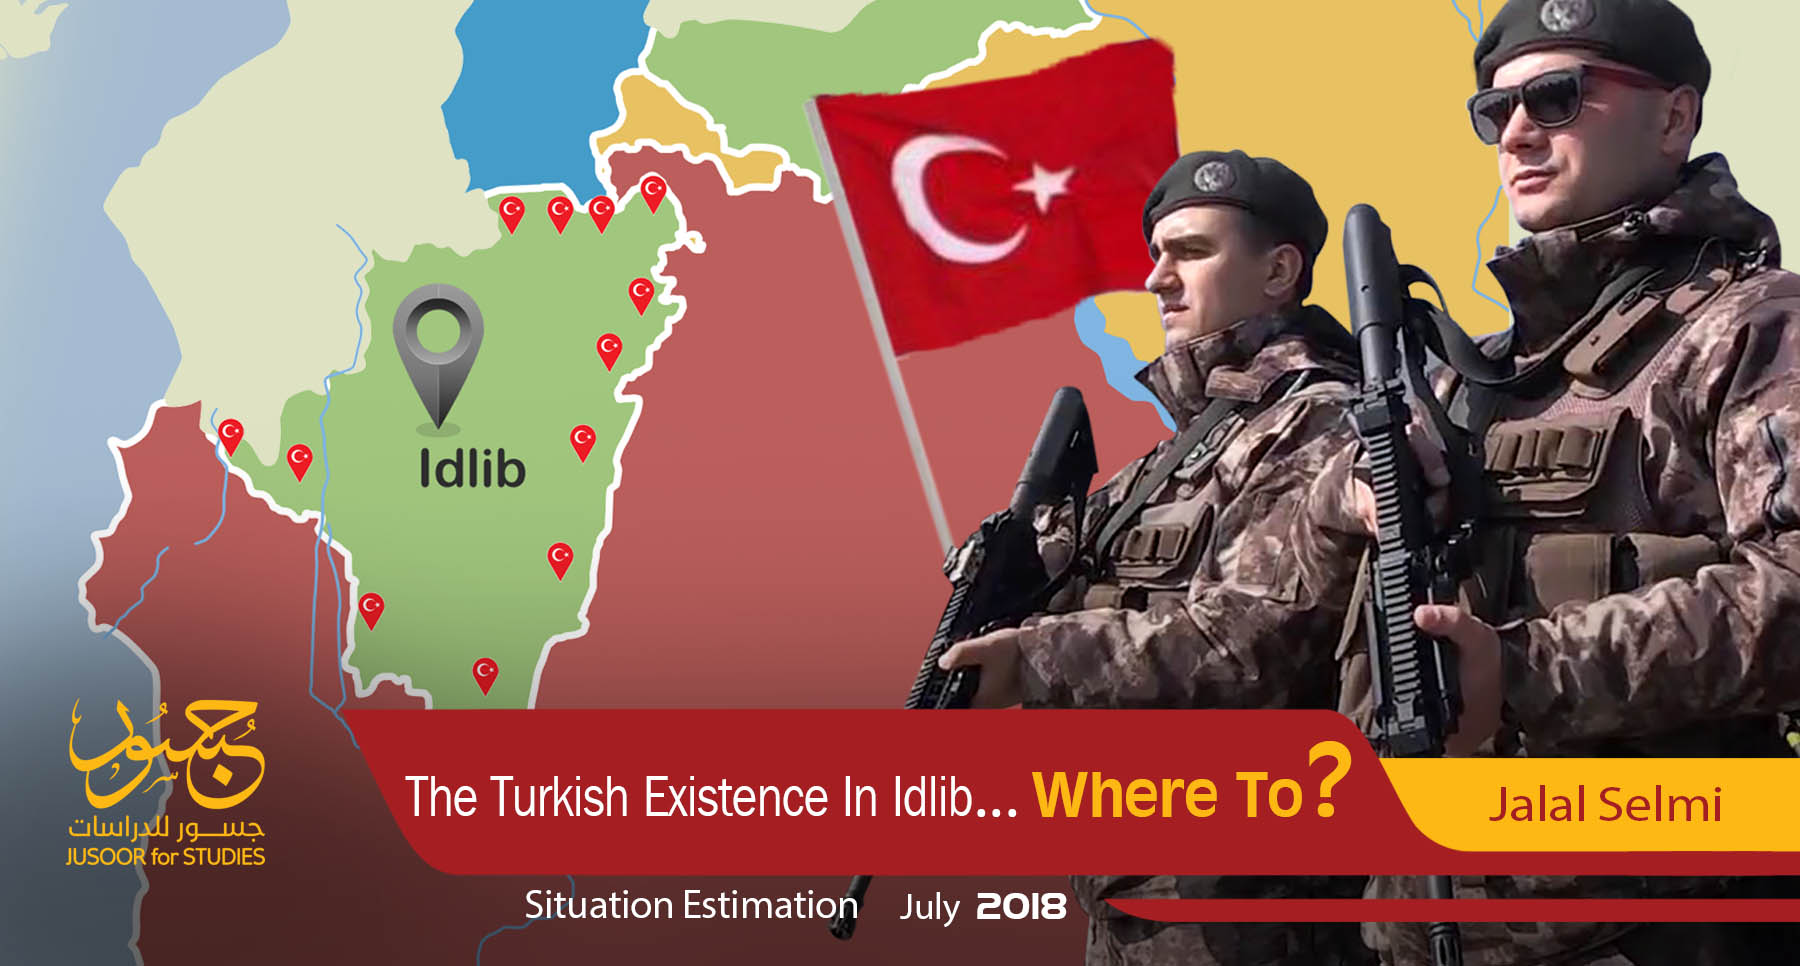 The Turkish Existence in Idlib... Where to?